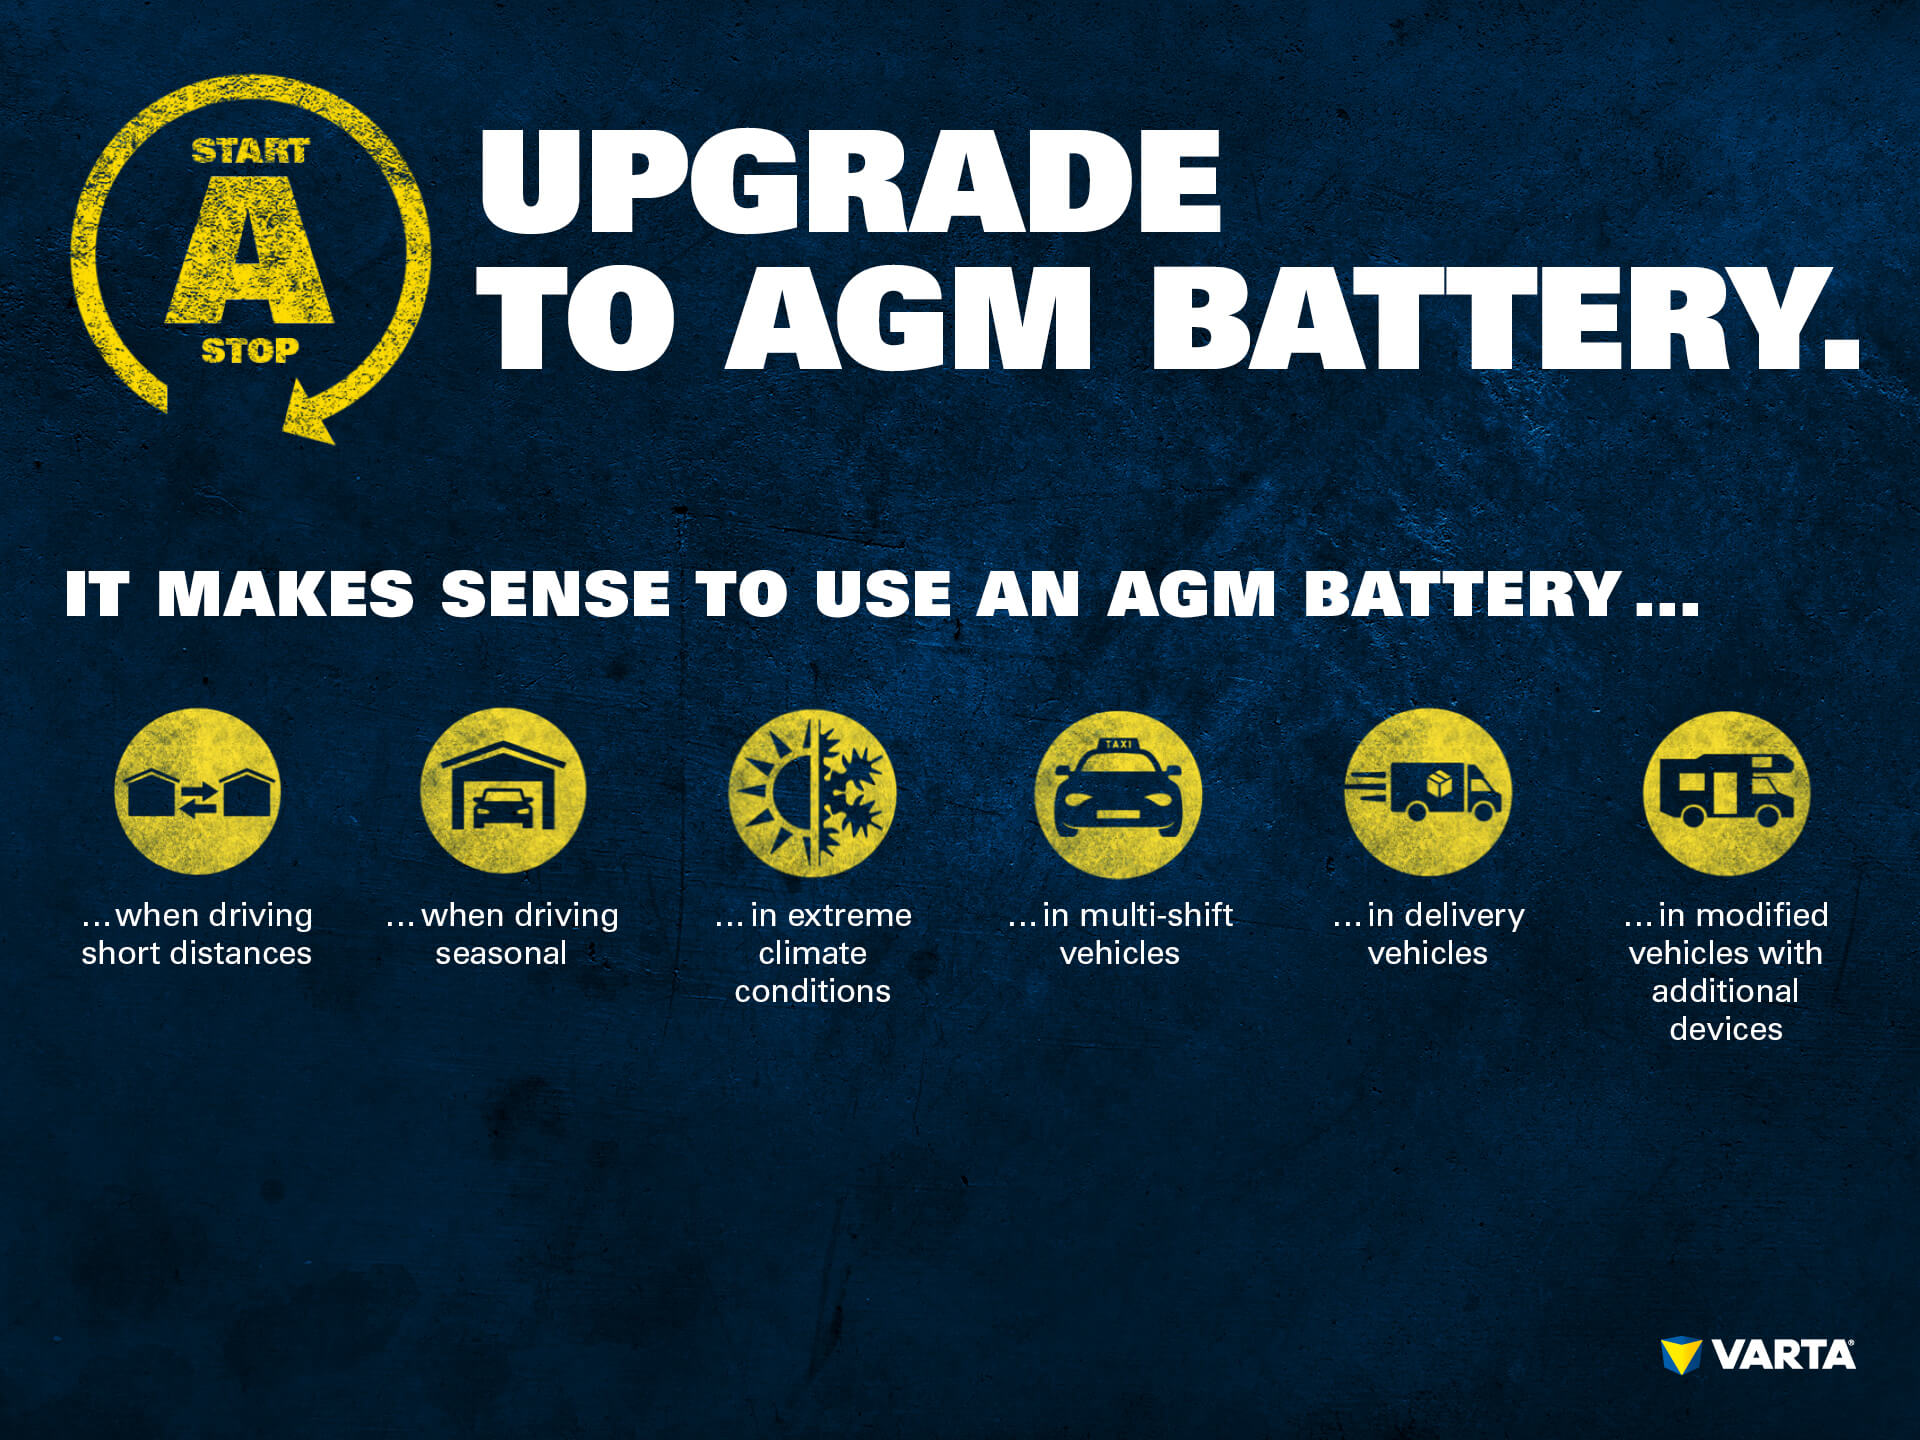 Is an AGM battery worthwhile without automatic start-stop technology?